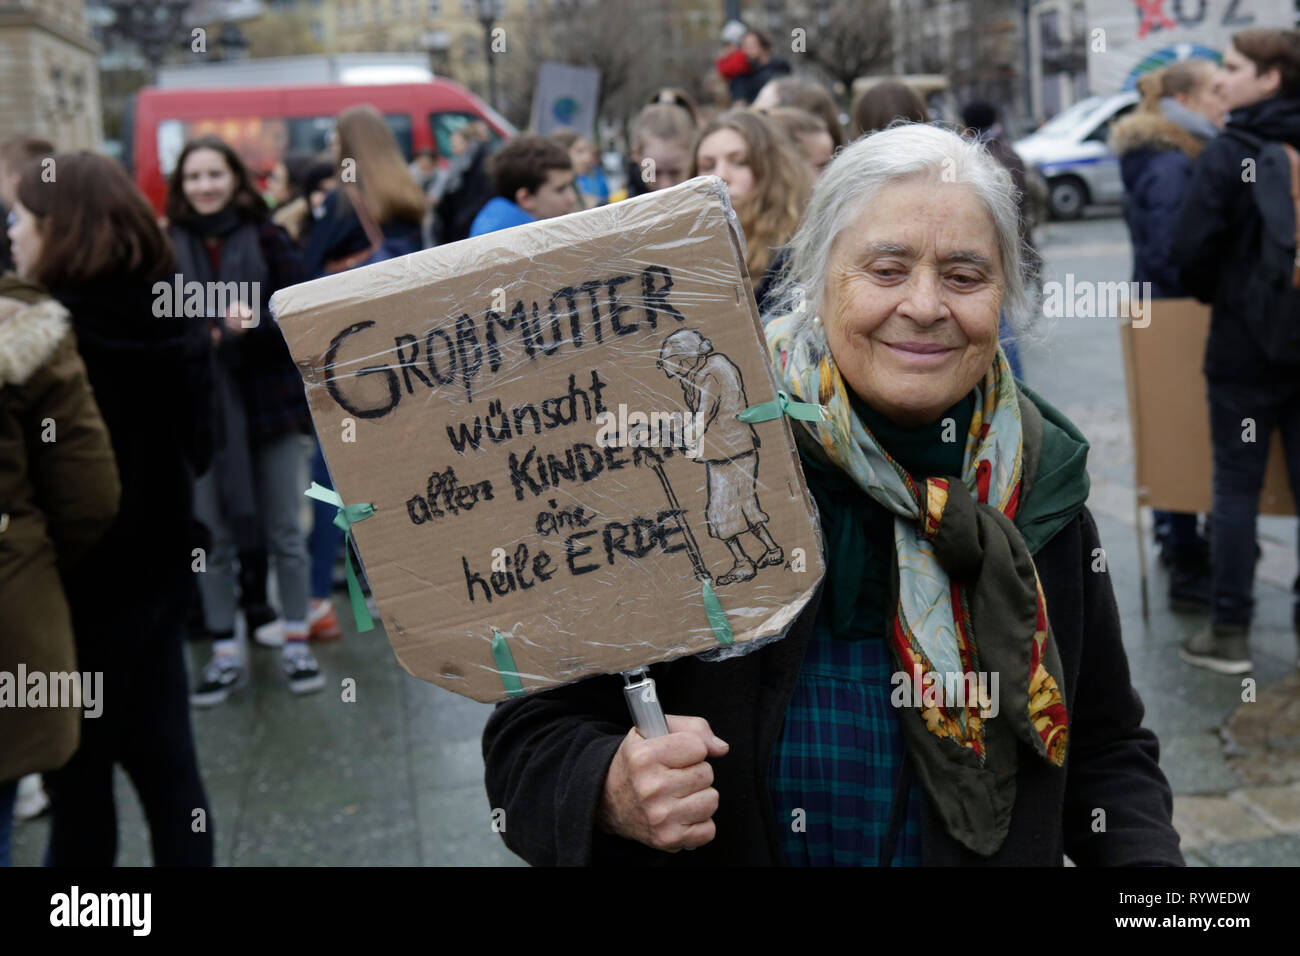 A protester holds a sign that reads 'Grandma wishes all children an intact'. Over 6,000 people (mostly pupils who skipped school to take part in the protest) marched through Frankfurt, to protest against the climate change and for the introduction of measurements against it. The protest was part of the worldwide climate strike day by the  FridaysForFuture movement, started by Greta Thunberg in Sweden. (Photo by Michael Debets/Pacific Press) Stock Photo